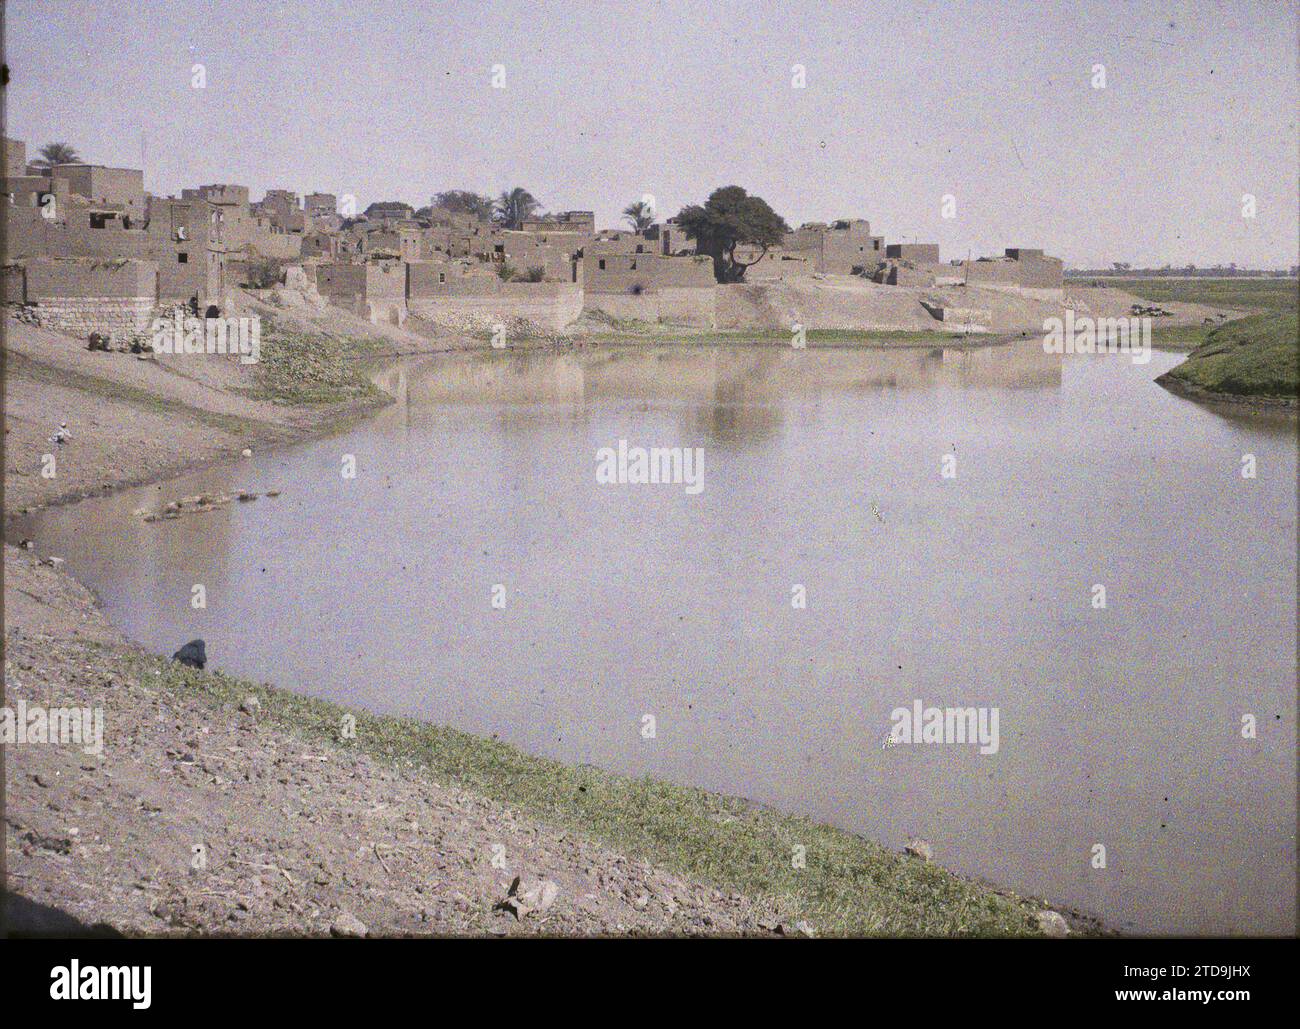 Assiut, Egypt, Africa The banks of the Ibrahimiya canal near the village, Housing, Architecture, Canal, Irrigation, Civil engineering, Rural architecture, Hydraulic installation, Panorama of agglomeration, Egypt, Assiout, Part of Assiout at the edge of the canal, Assiout, 01/02/1914 - 01/02/1914, Léon, Auguste, photographer, 1914 - Egypte - Auguste Léon - (January-February), Autochrome, photo, Glass, Autochrome, photo, Positive Stock Photo